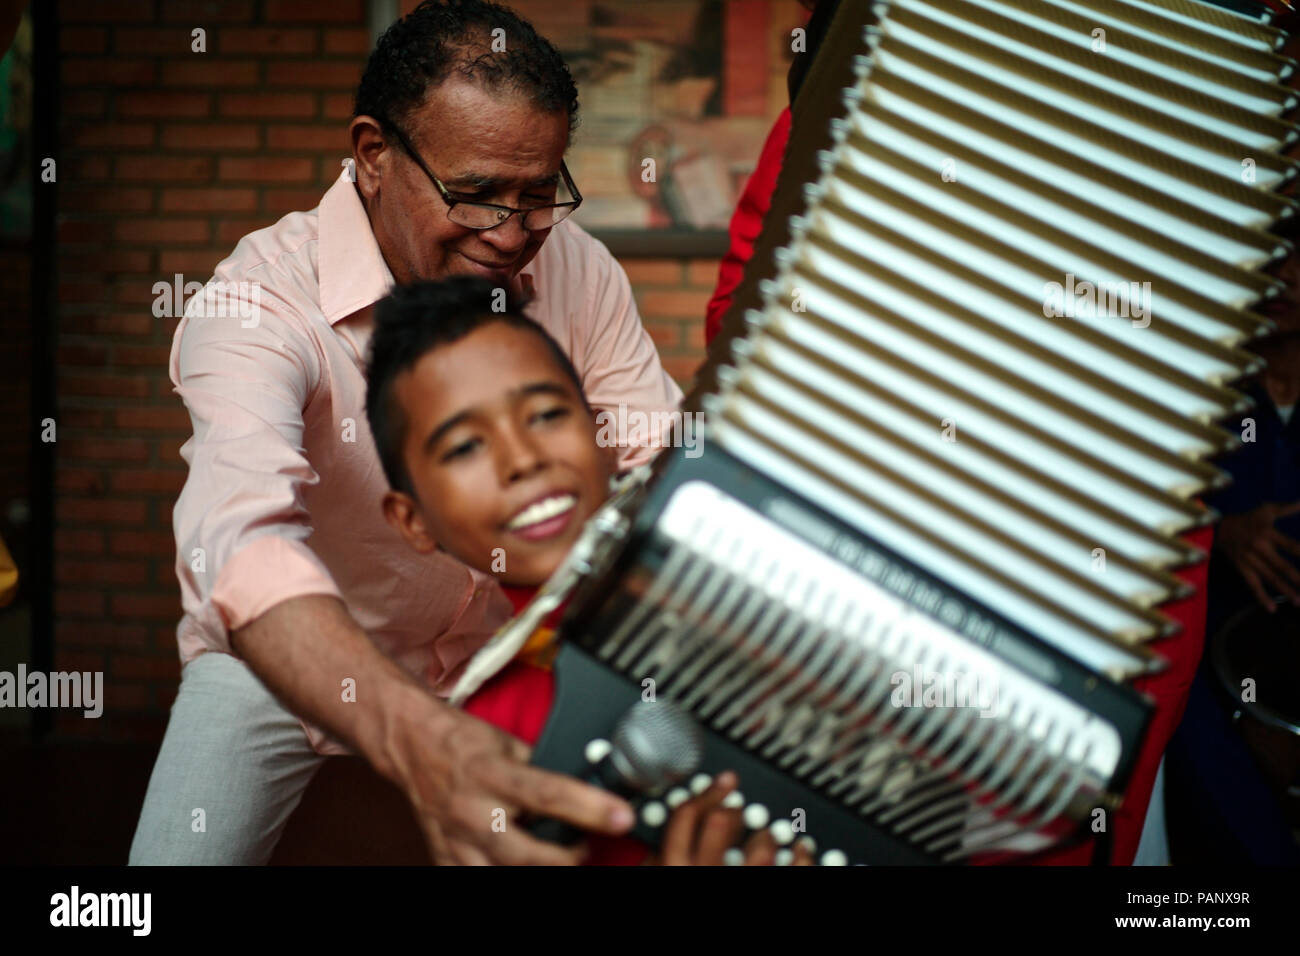 Andres ‘Turco’ Gil’s accordion academy trains young children in the music of vallenato, many of them are refugees from violence or live in poverty Stock Photo